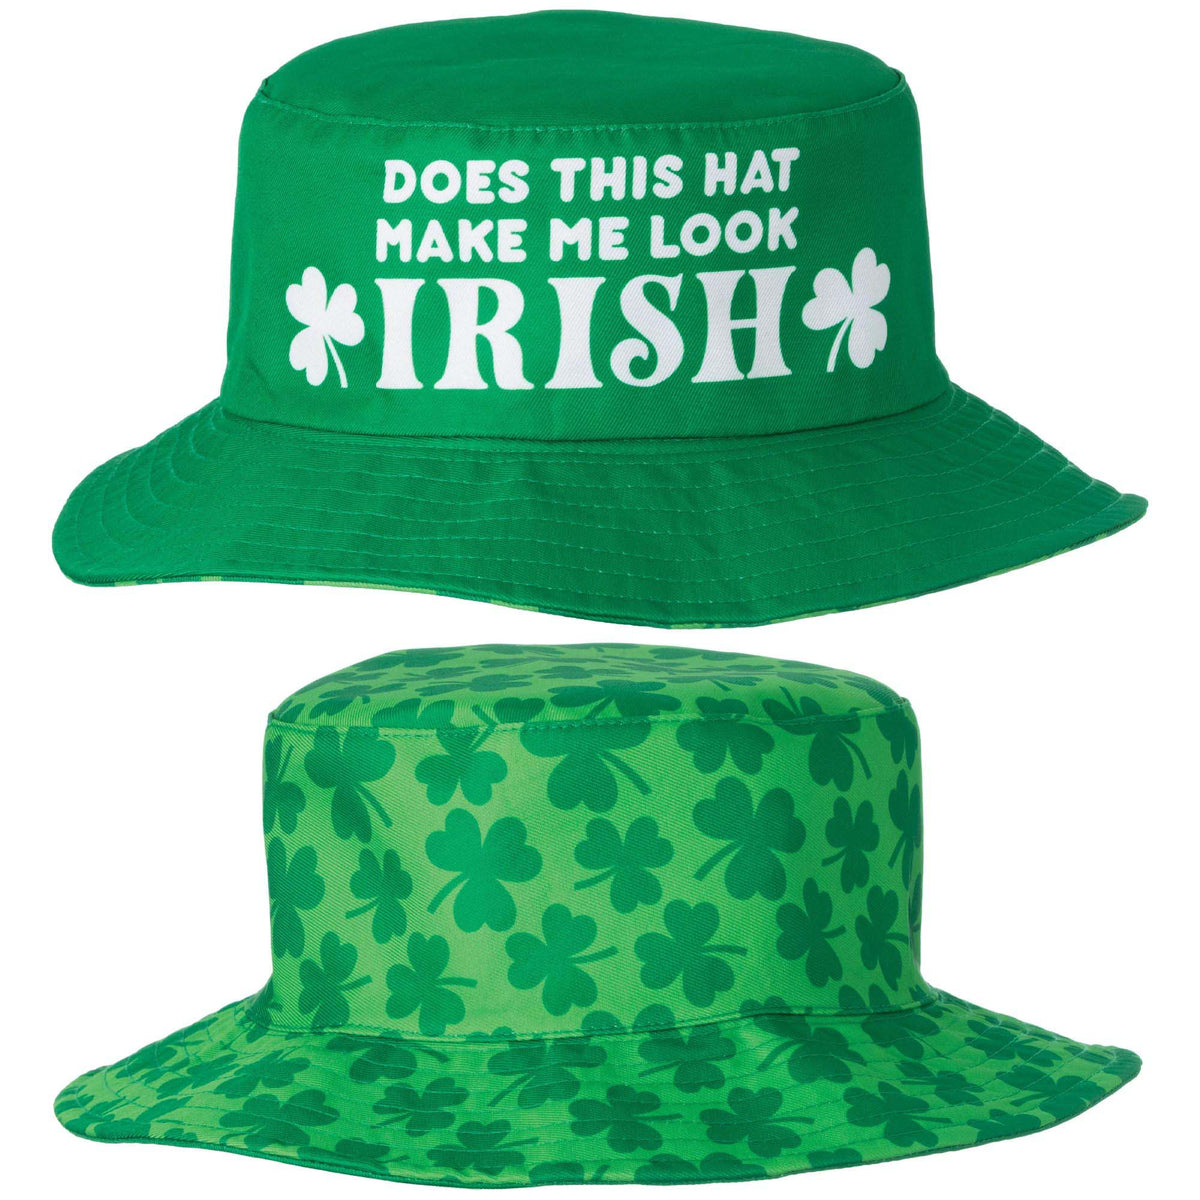 AMSCAN CA St-Patrick St-Patrick's Day Reversible Bucket Hat, 1 Count 192937429280